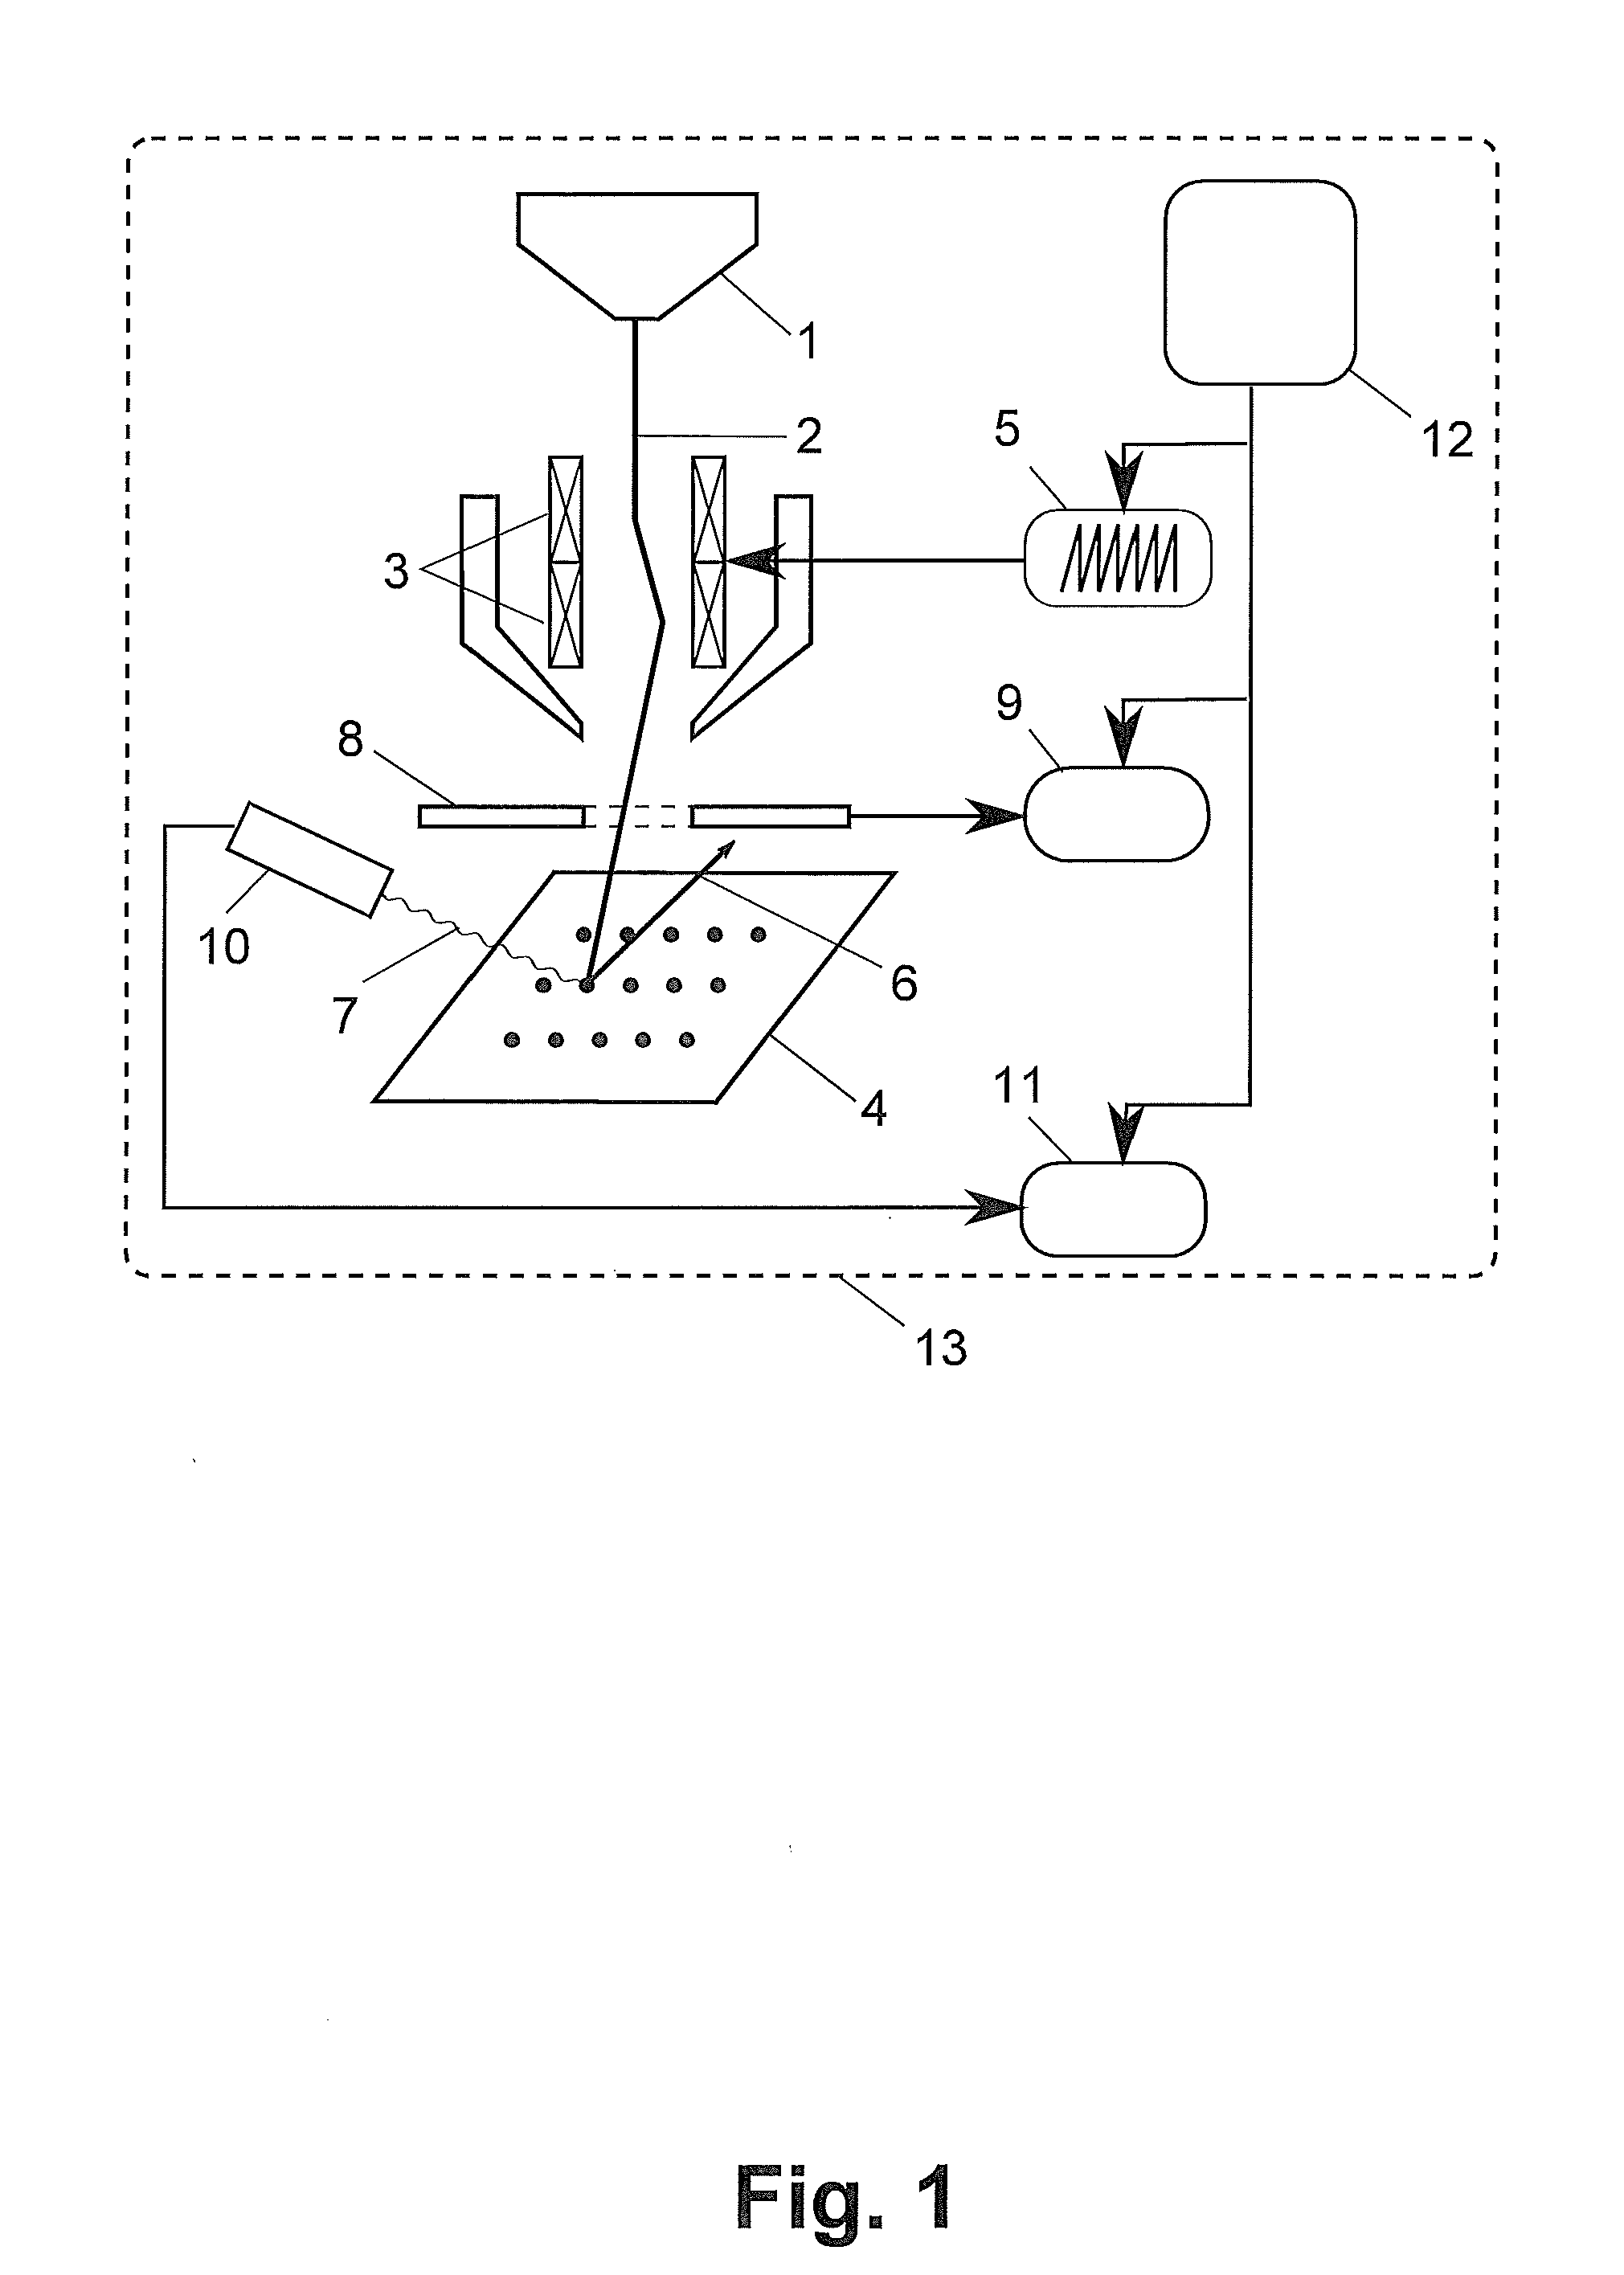 Method and apparatus for material analysis by a focused electron beam using characteristic x-rays and back-scattered electrons